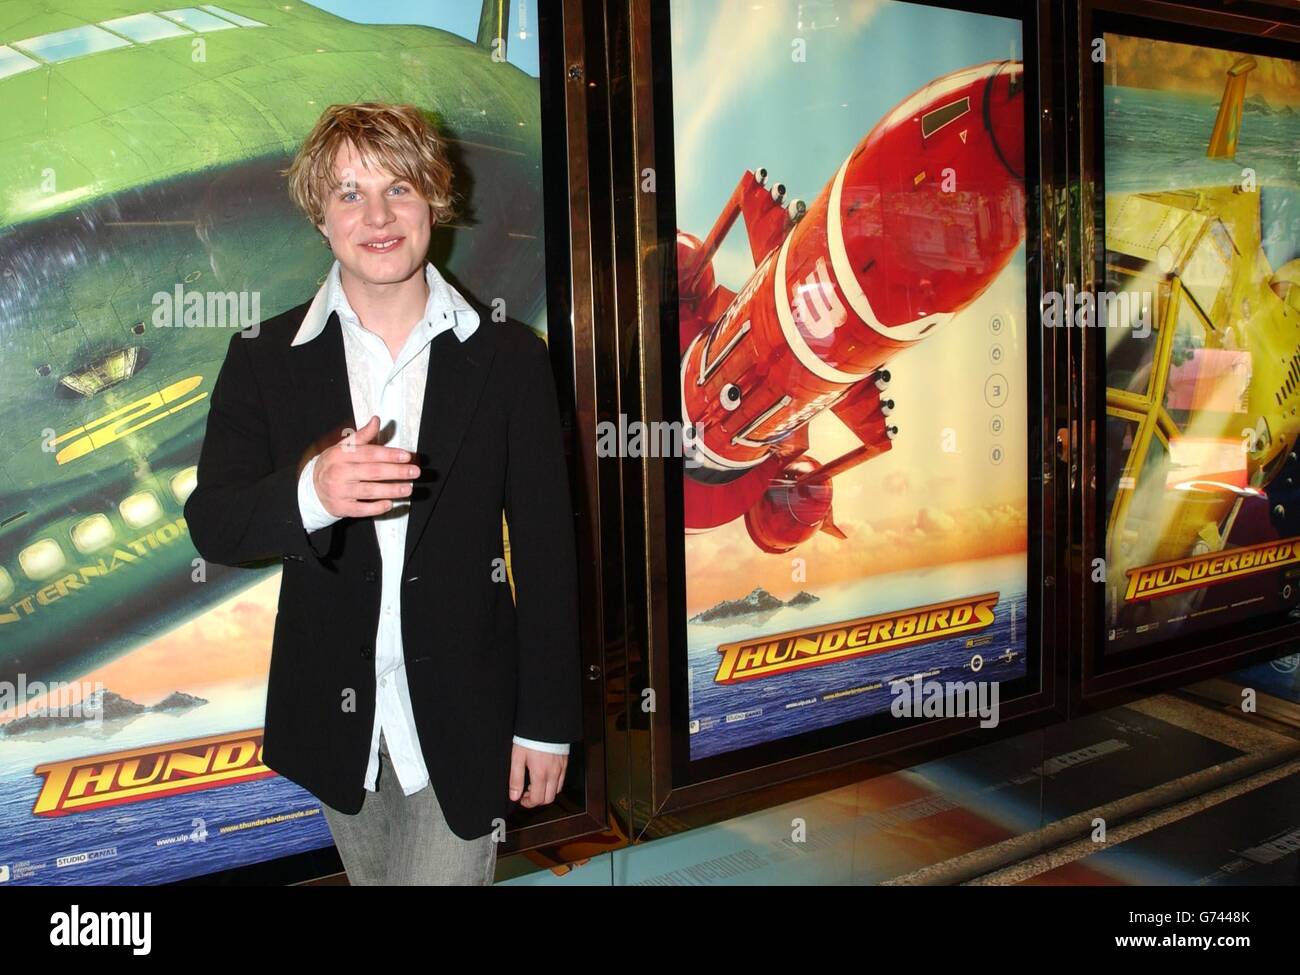 Star of the film Brady Corbet arrives for the UK premiere of Thunderbirds, at the Empire Leicester Square in central London. Stock Photo